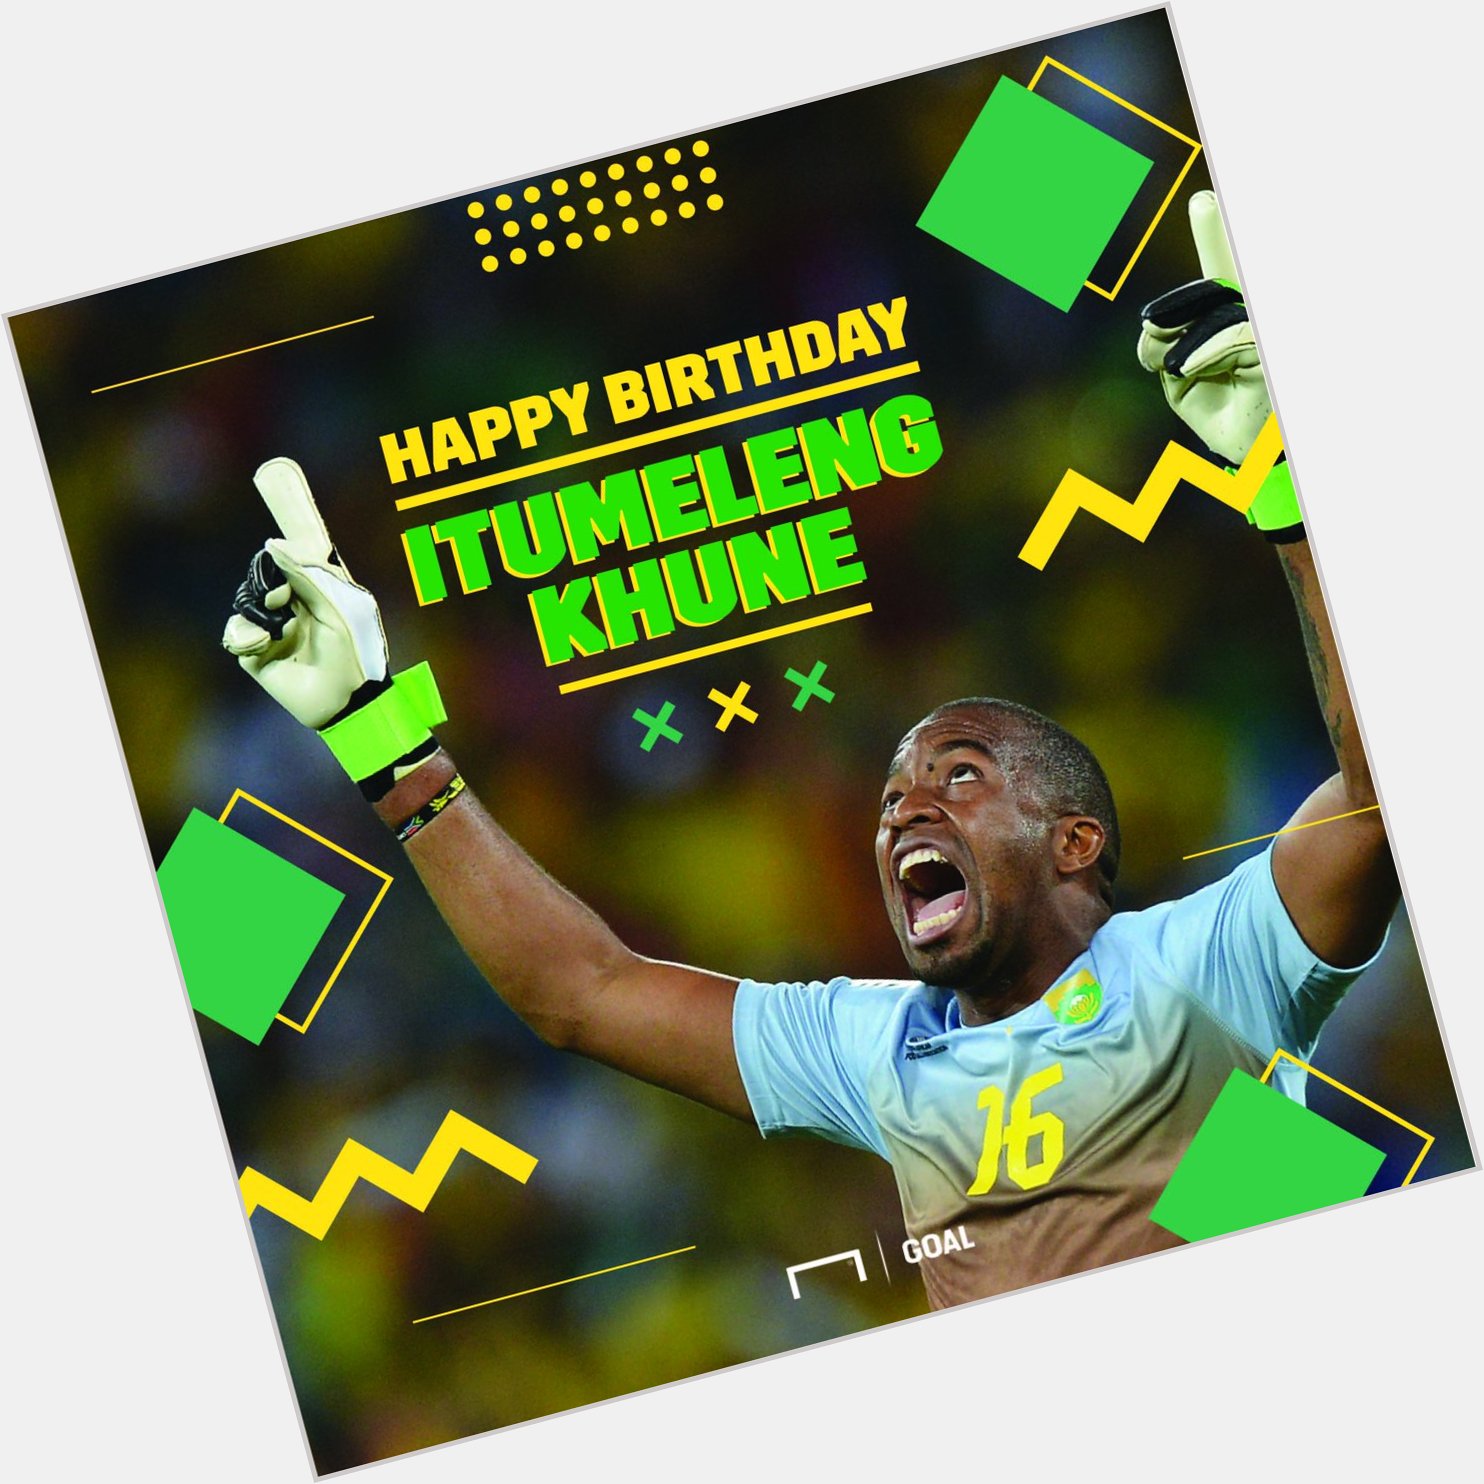 Join us in wishing Itumeleng Khune a very happy birthday! 